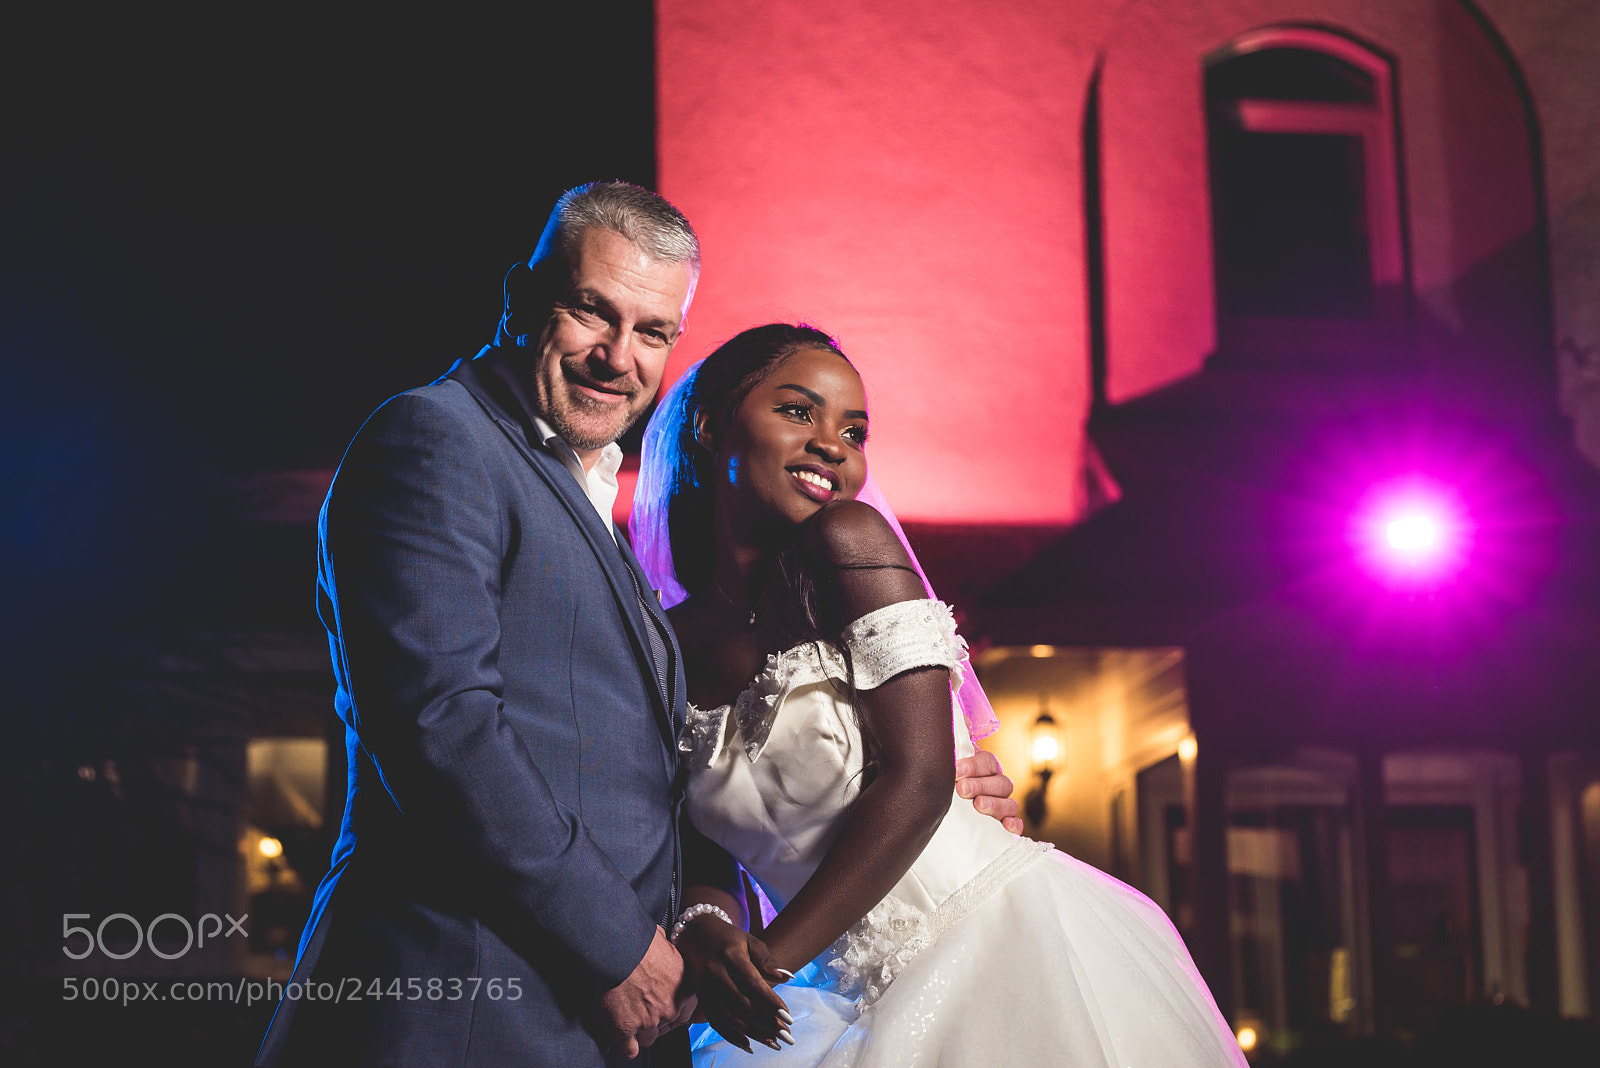 Nikon D810 sample photo. A wedding with style photography